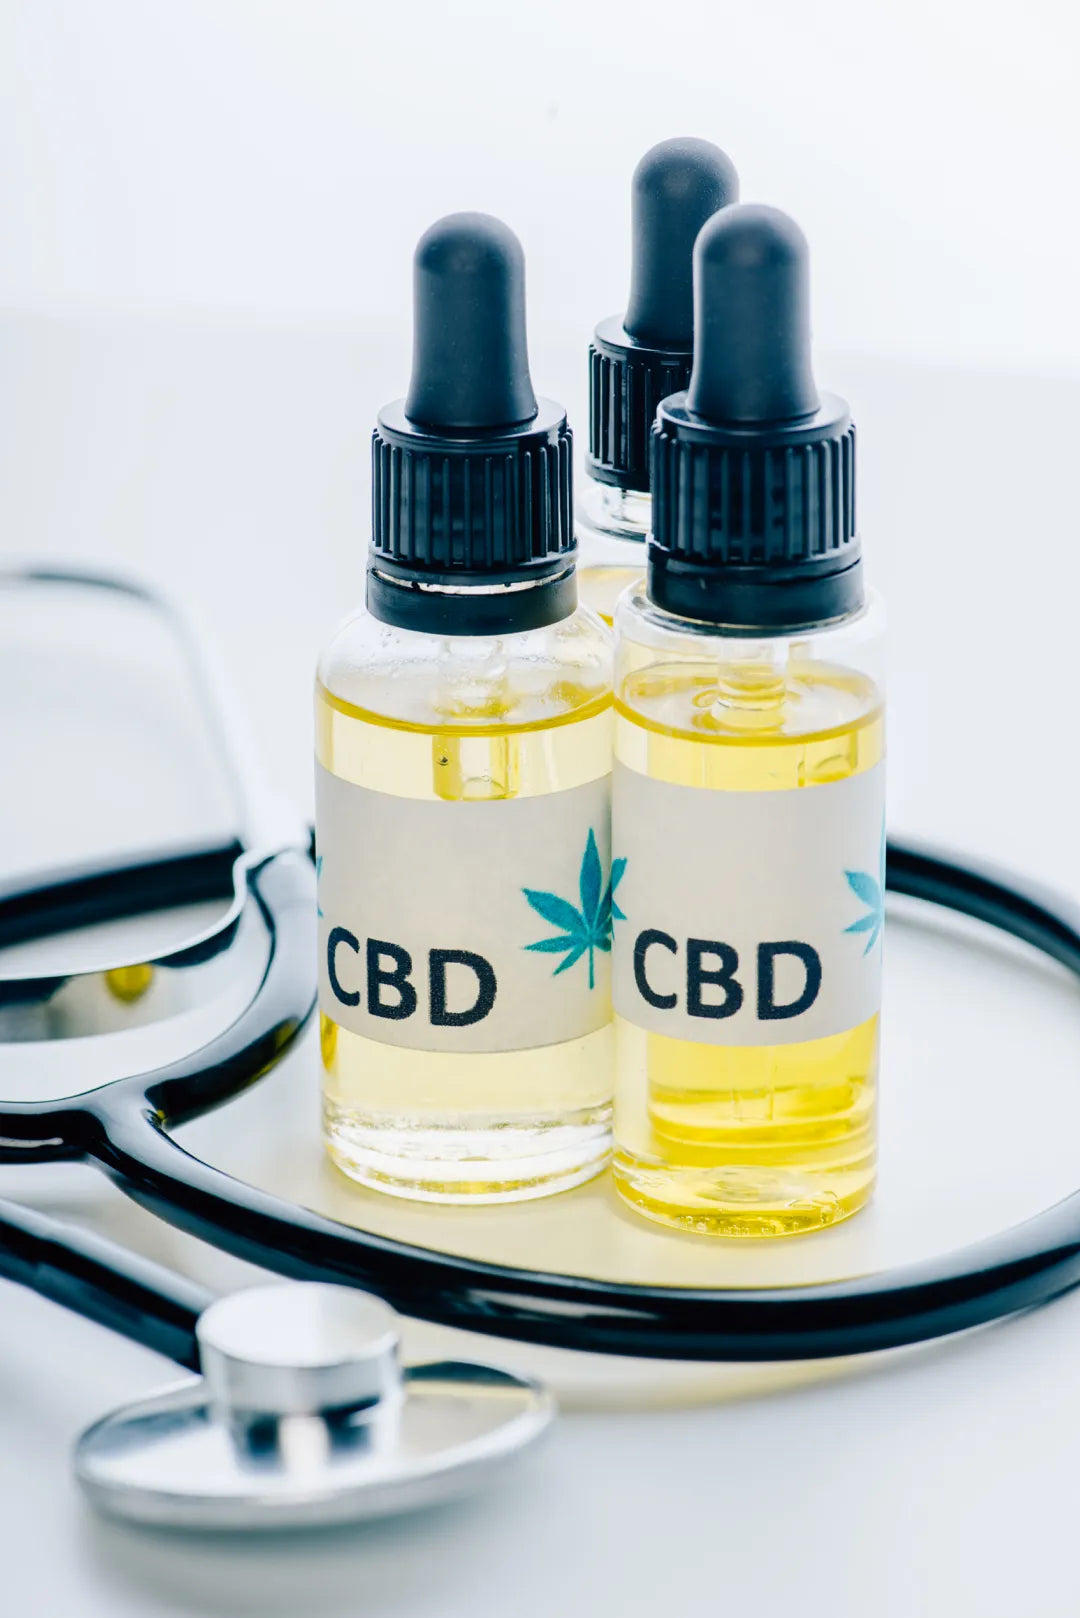 Three containers of CBD oil and stethoscope on a white background.